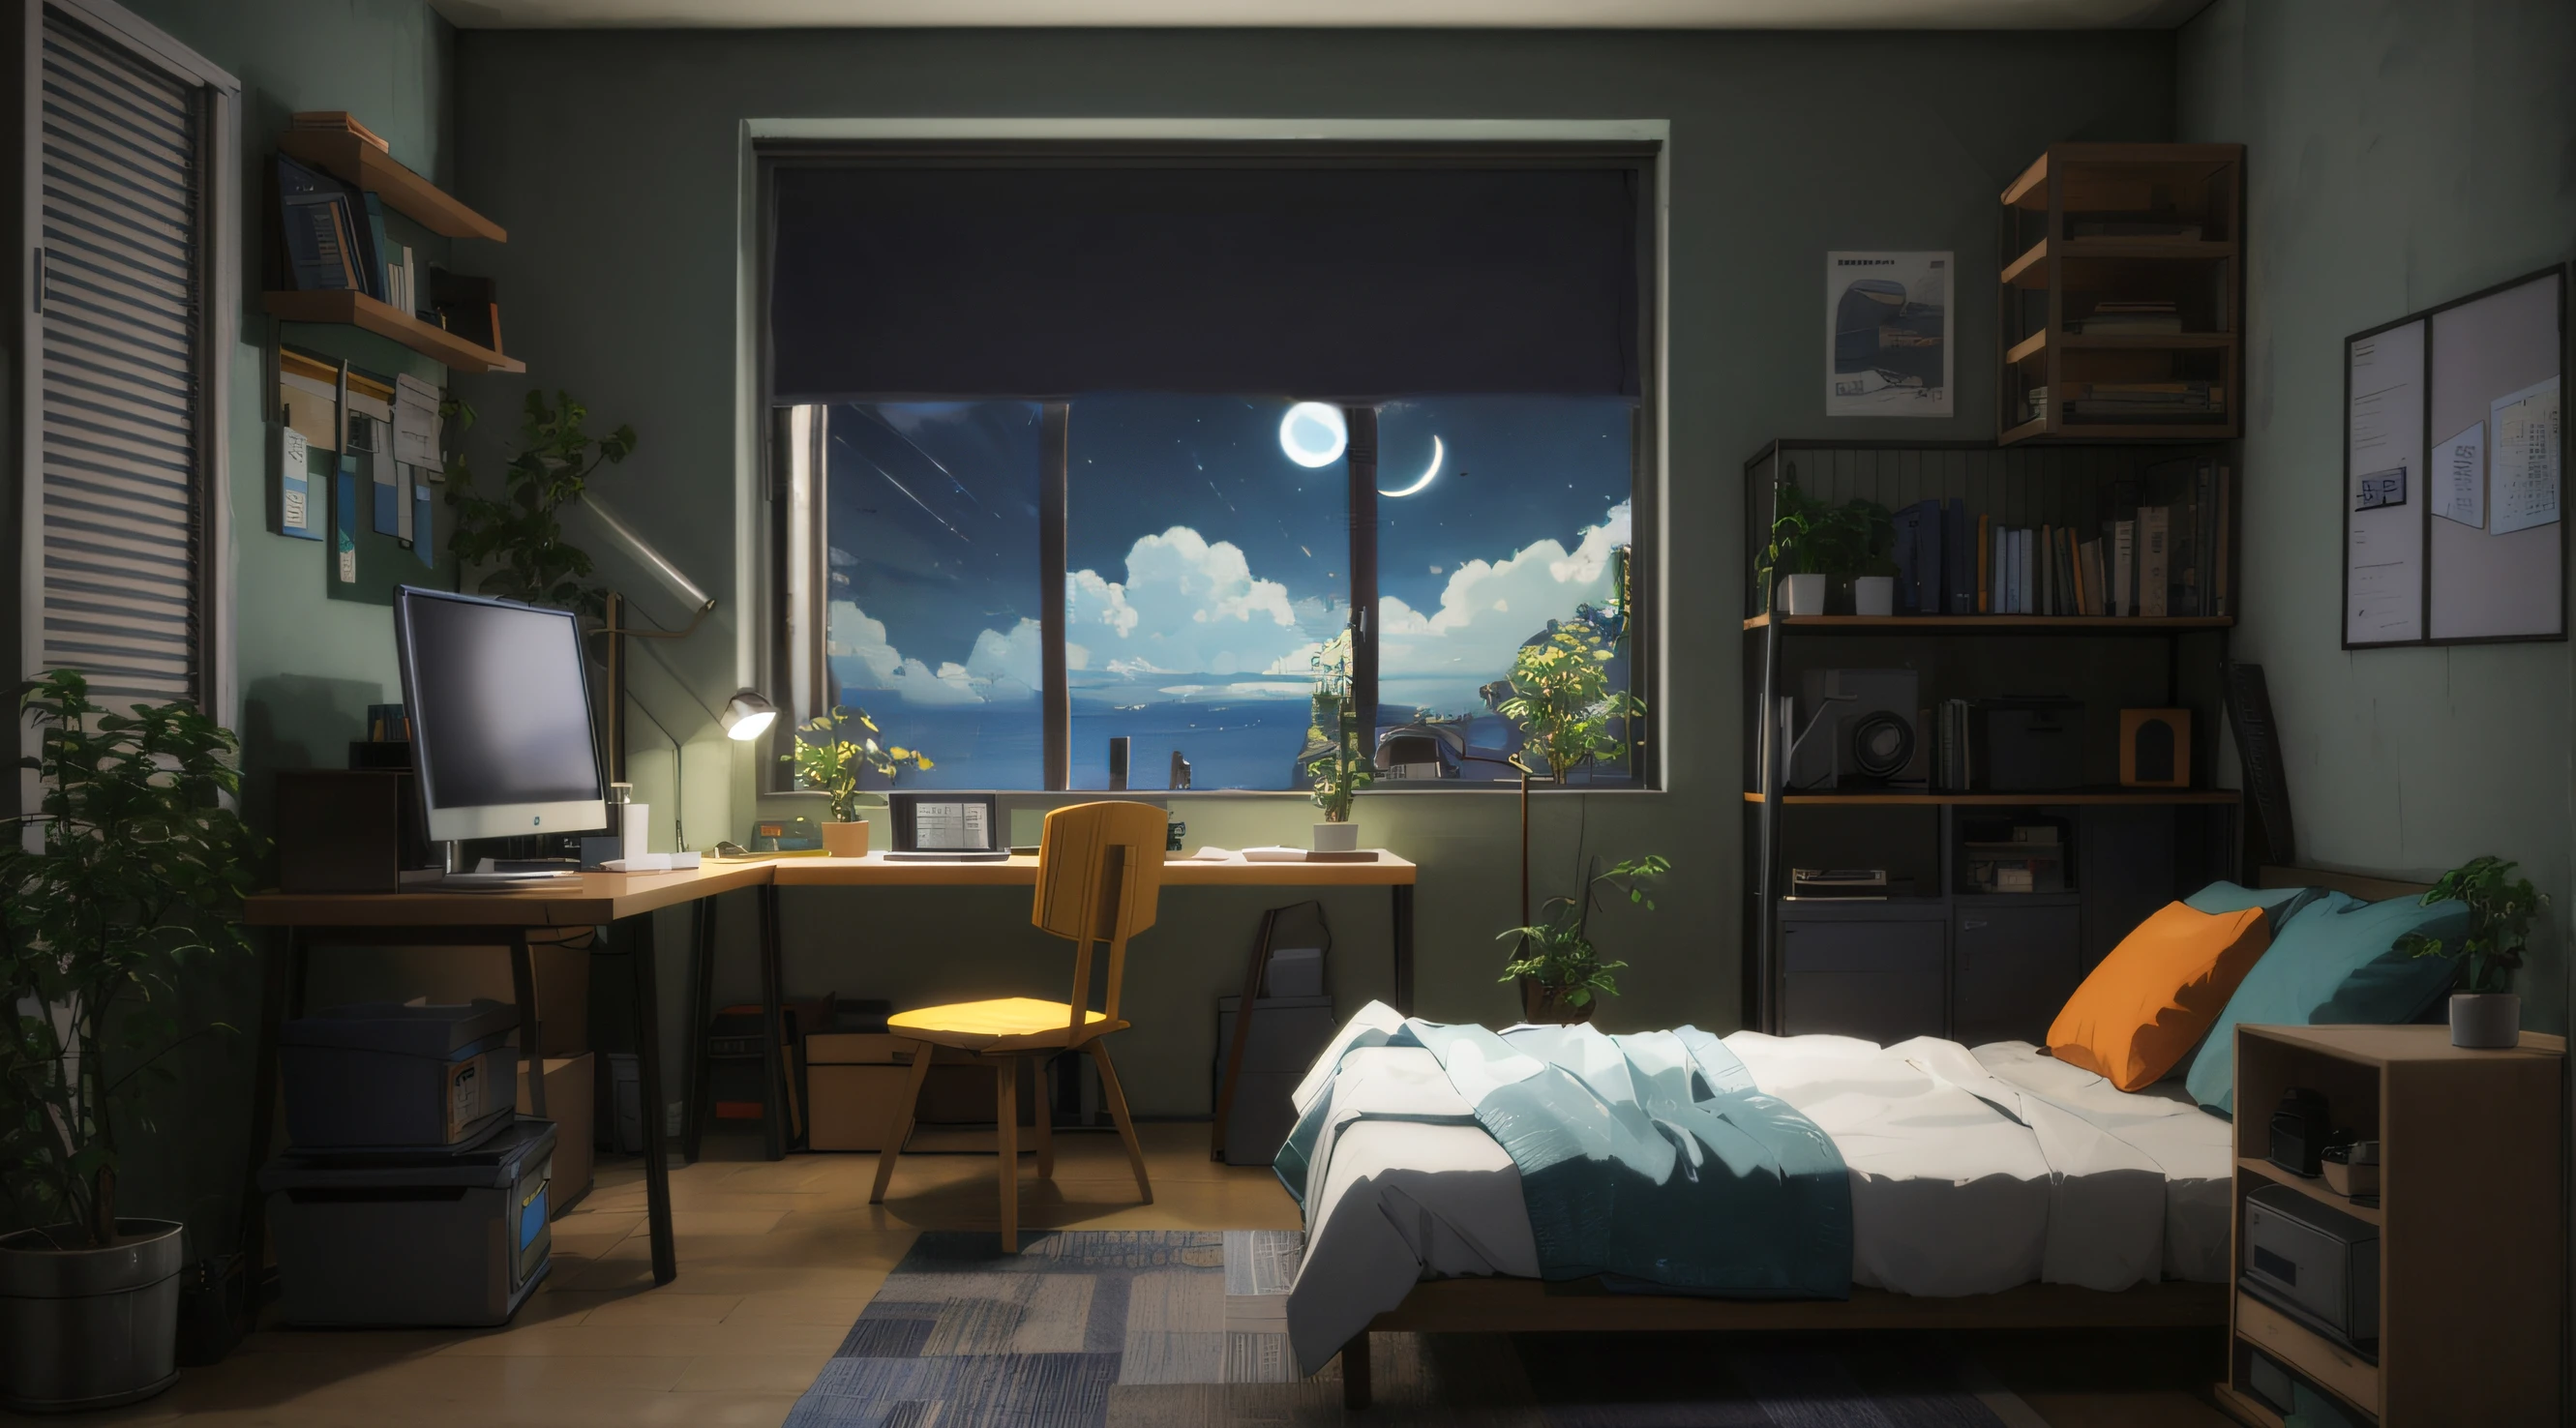 , High quality. FULLSCREEN. WINDOW WITH SKY, AT NIGHT, WITH MOON